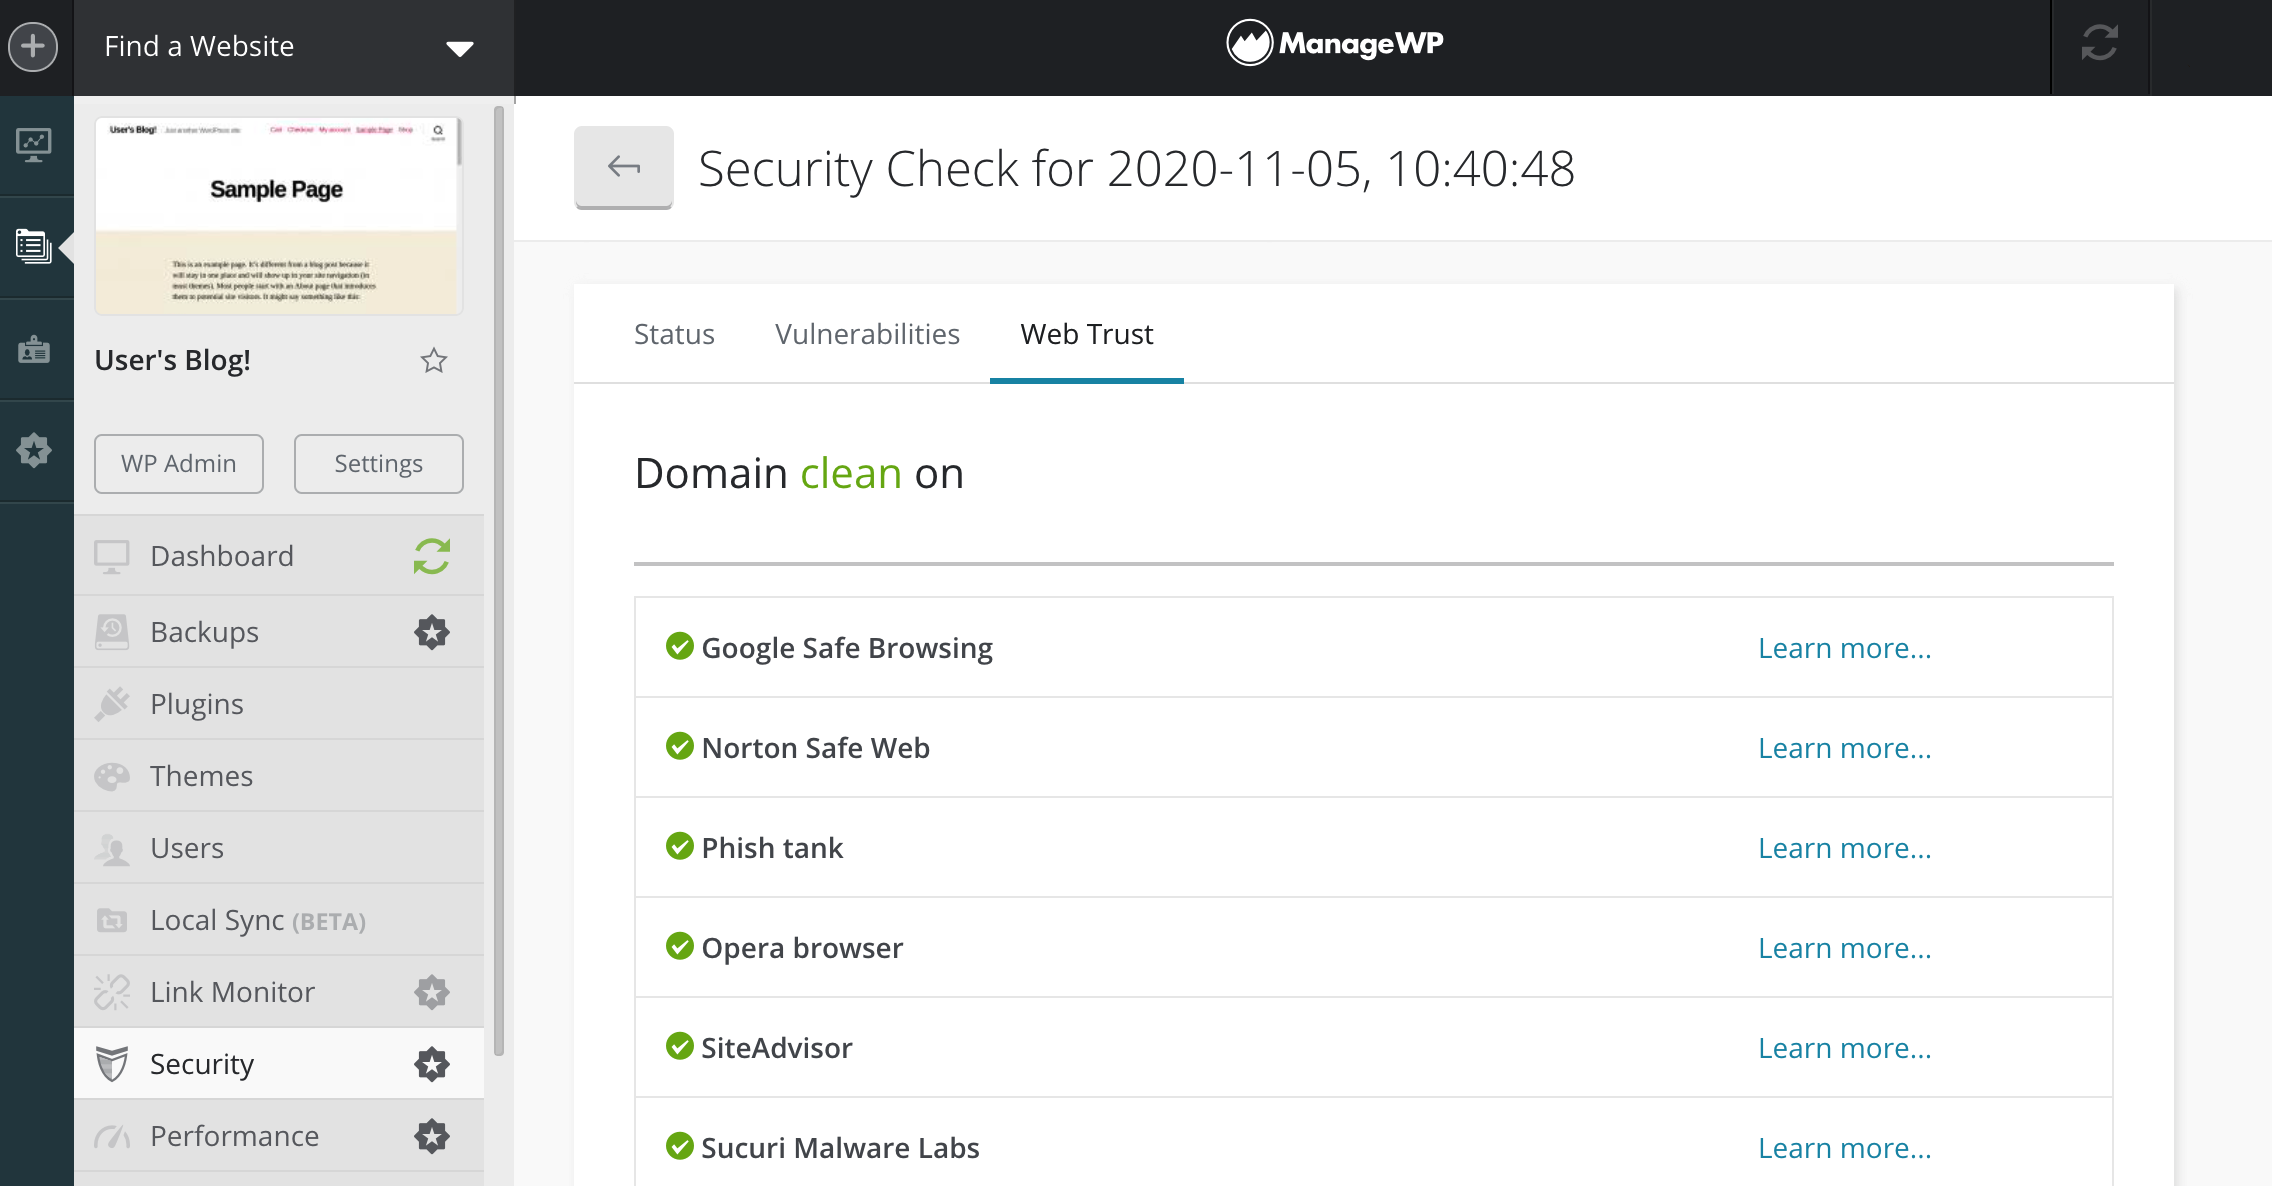 ManageWP's Security Check report, including blacklist information.